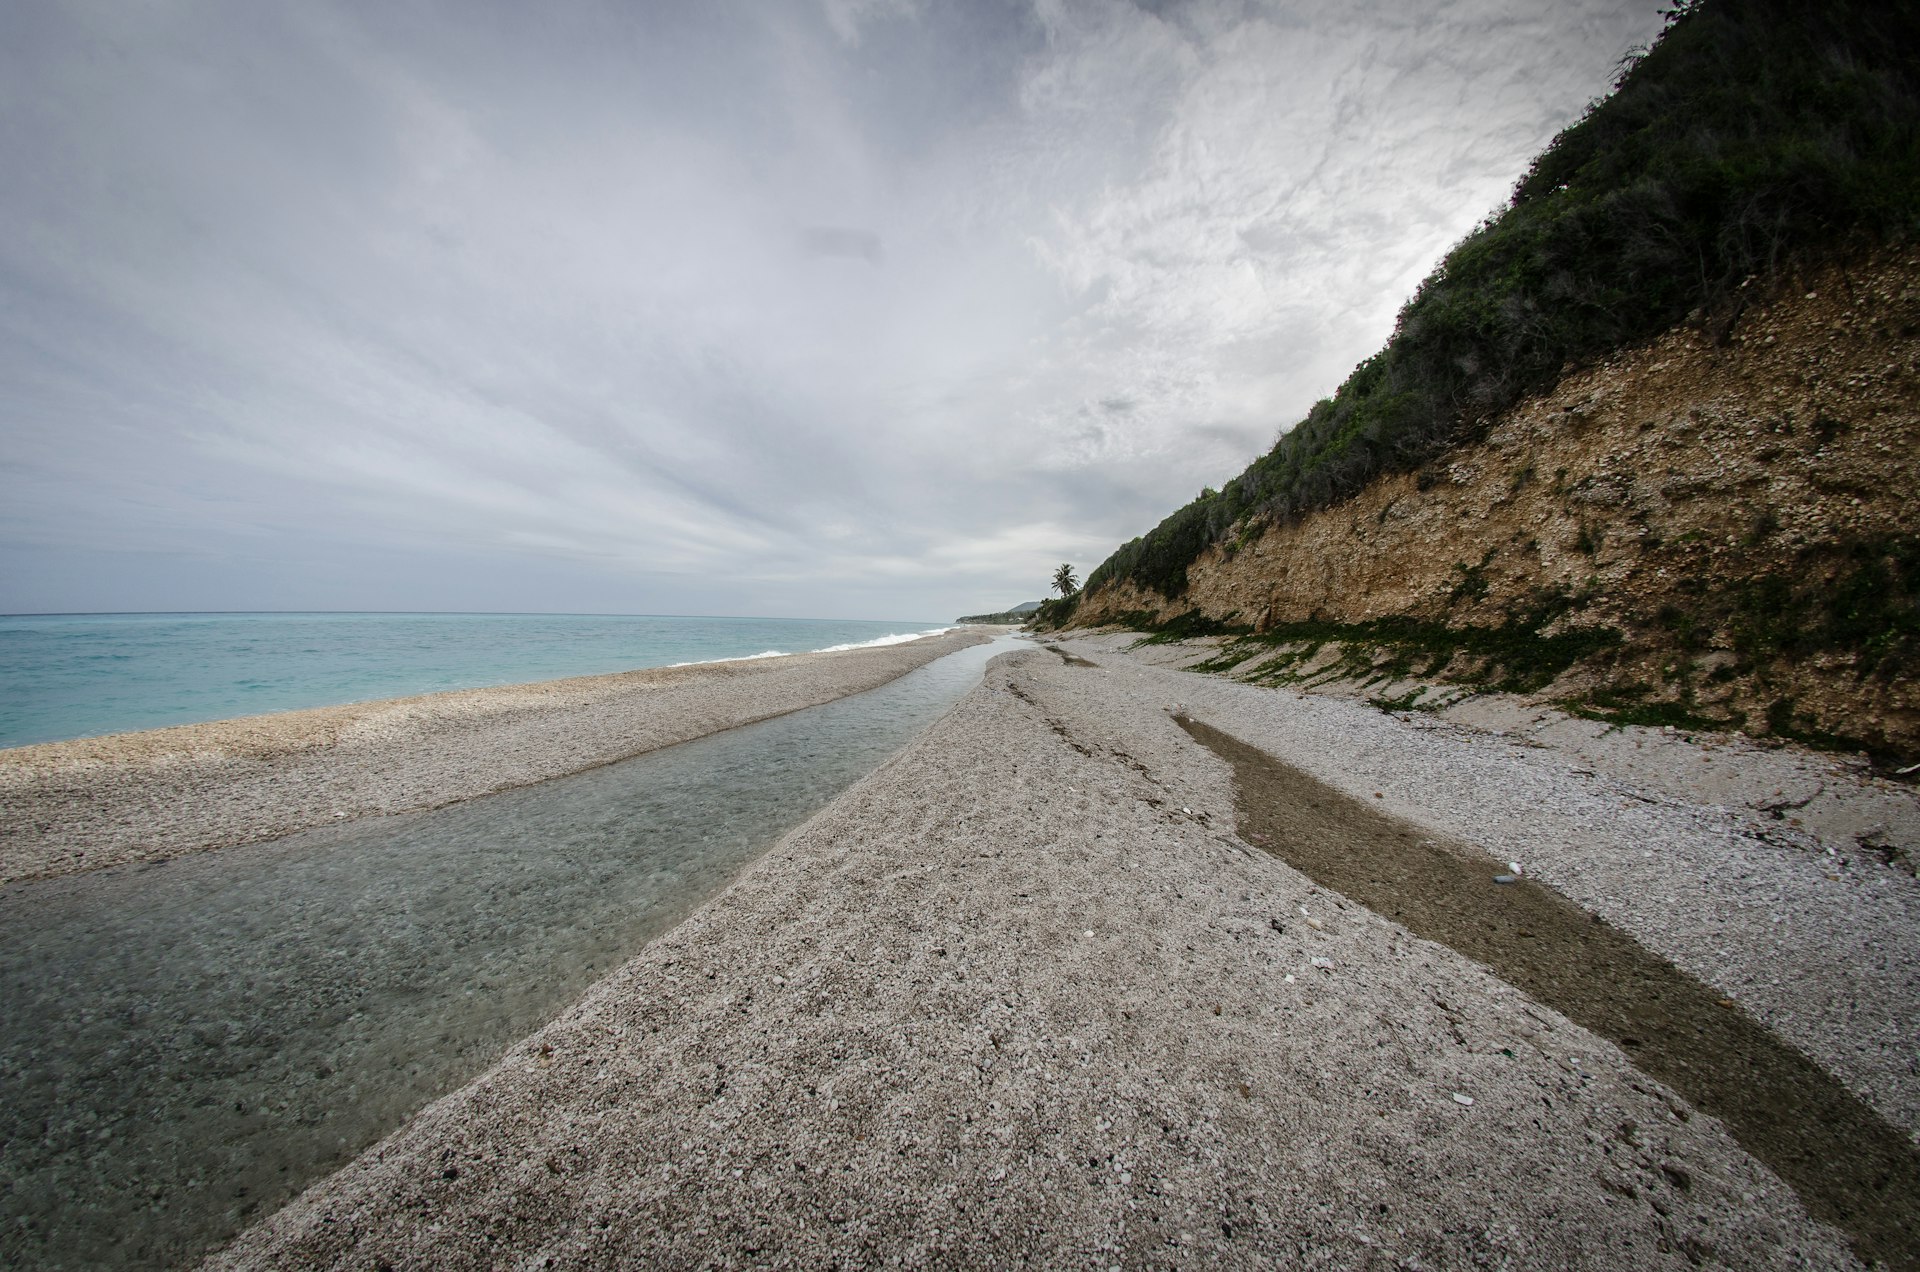 Shell filled beach on a dark cloudy day. There is a hill covered with trees to the left. 